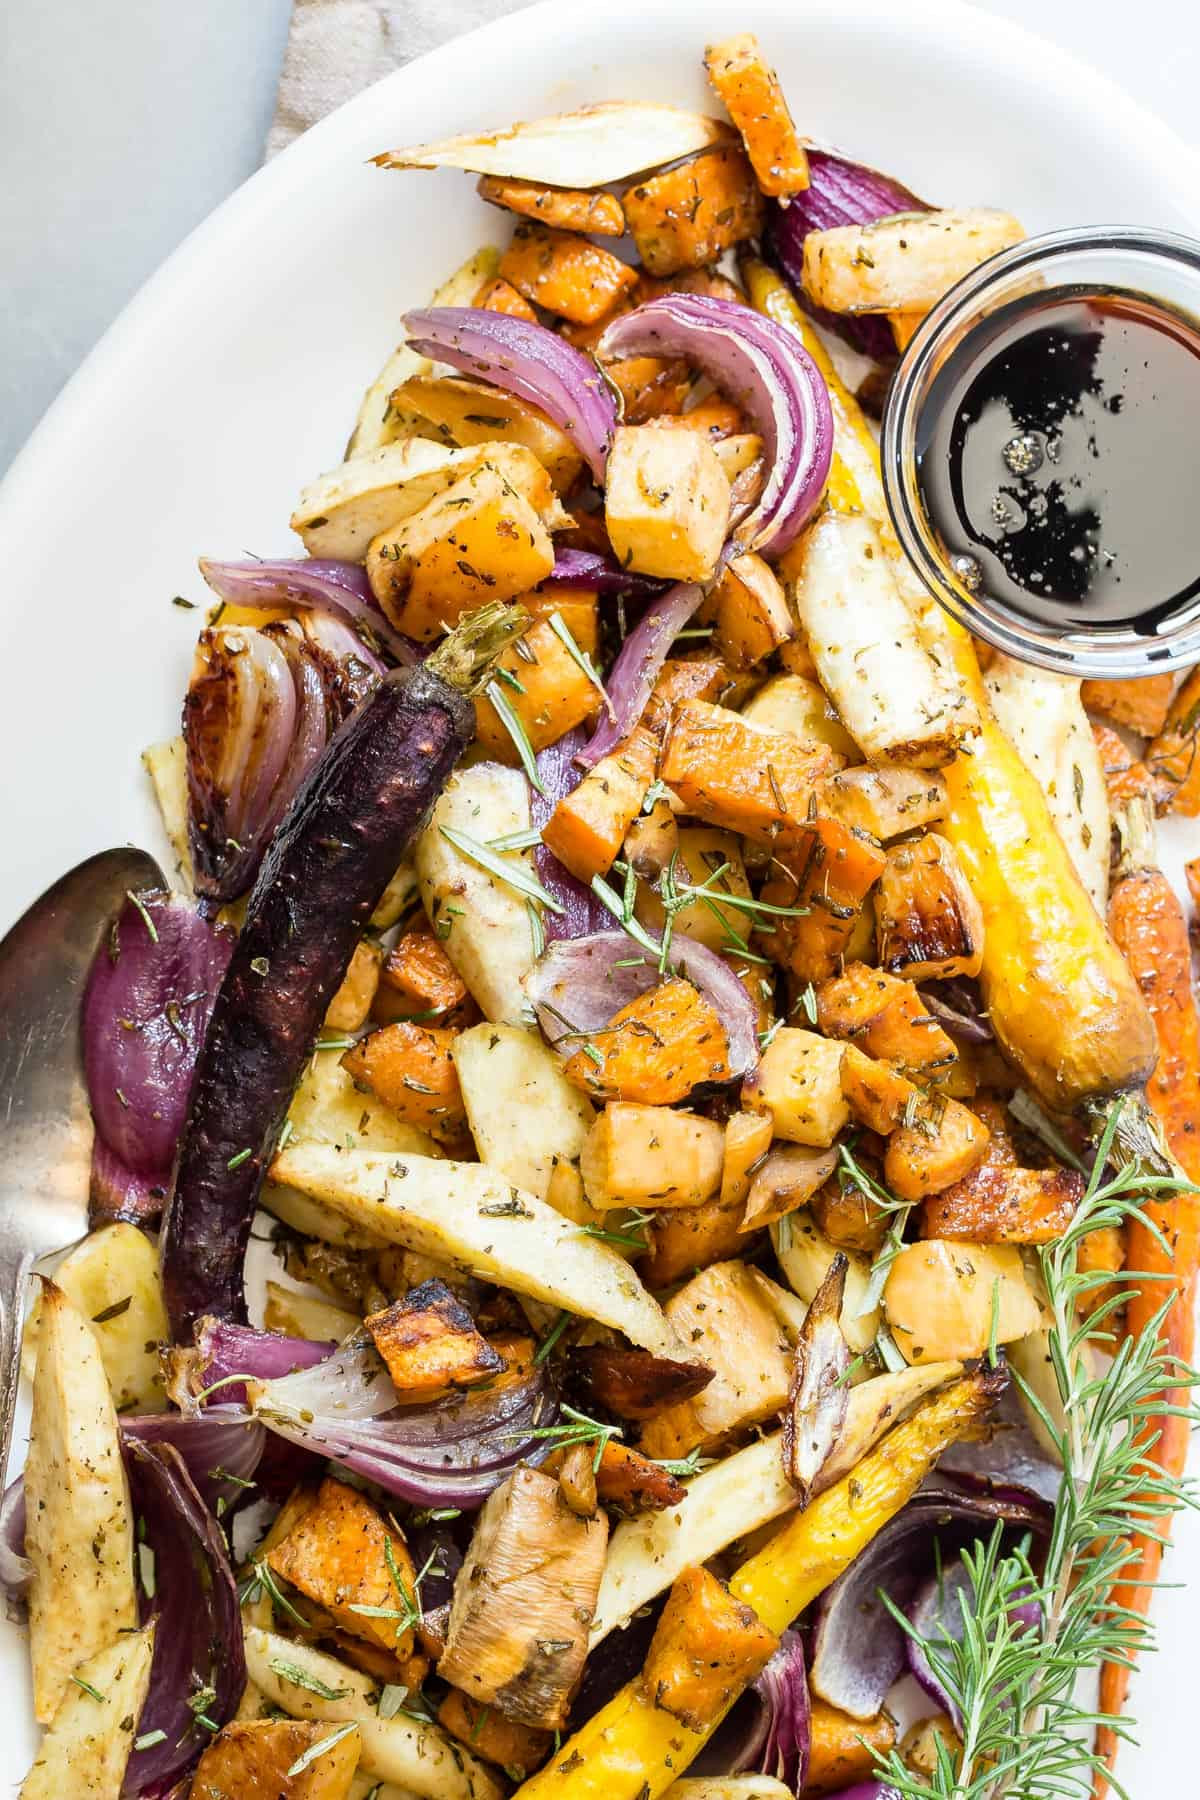 Roasted Vegetables With Balsamic Glaze
 roasted root ve ables with balsamic glaze